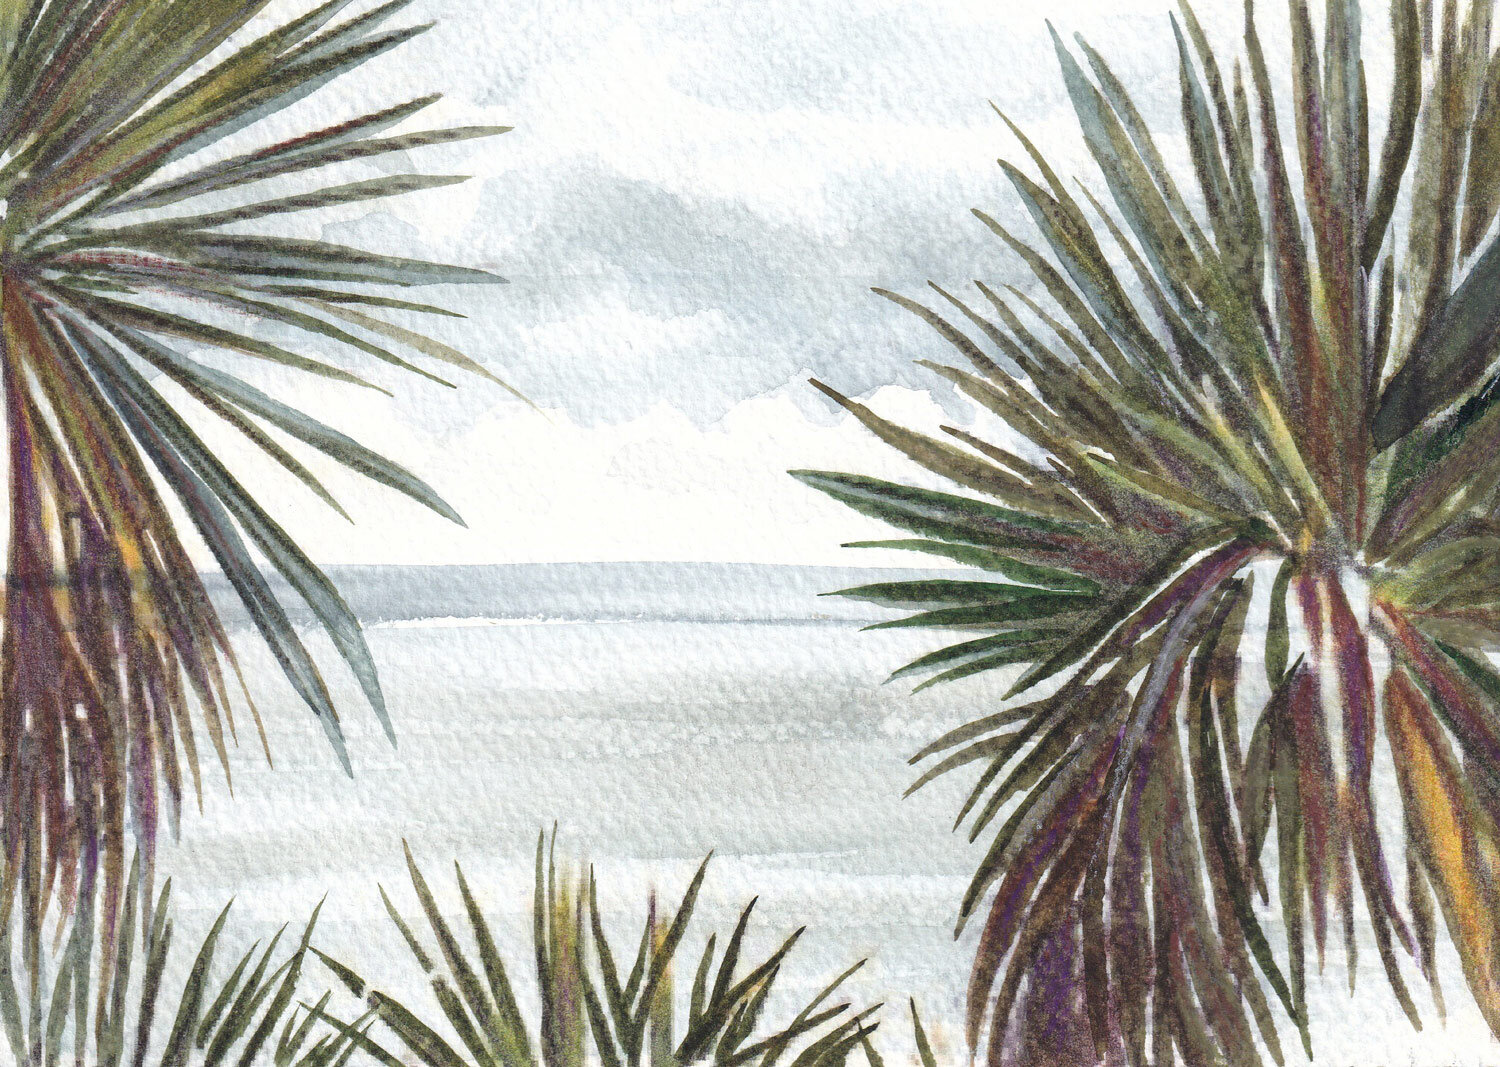 Dorset Palms by the Sea